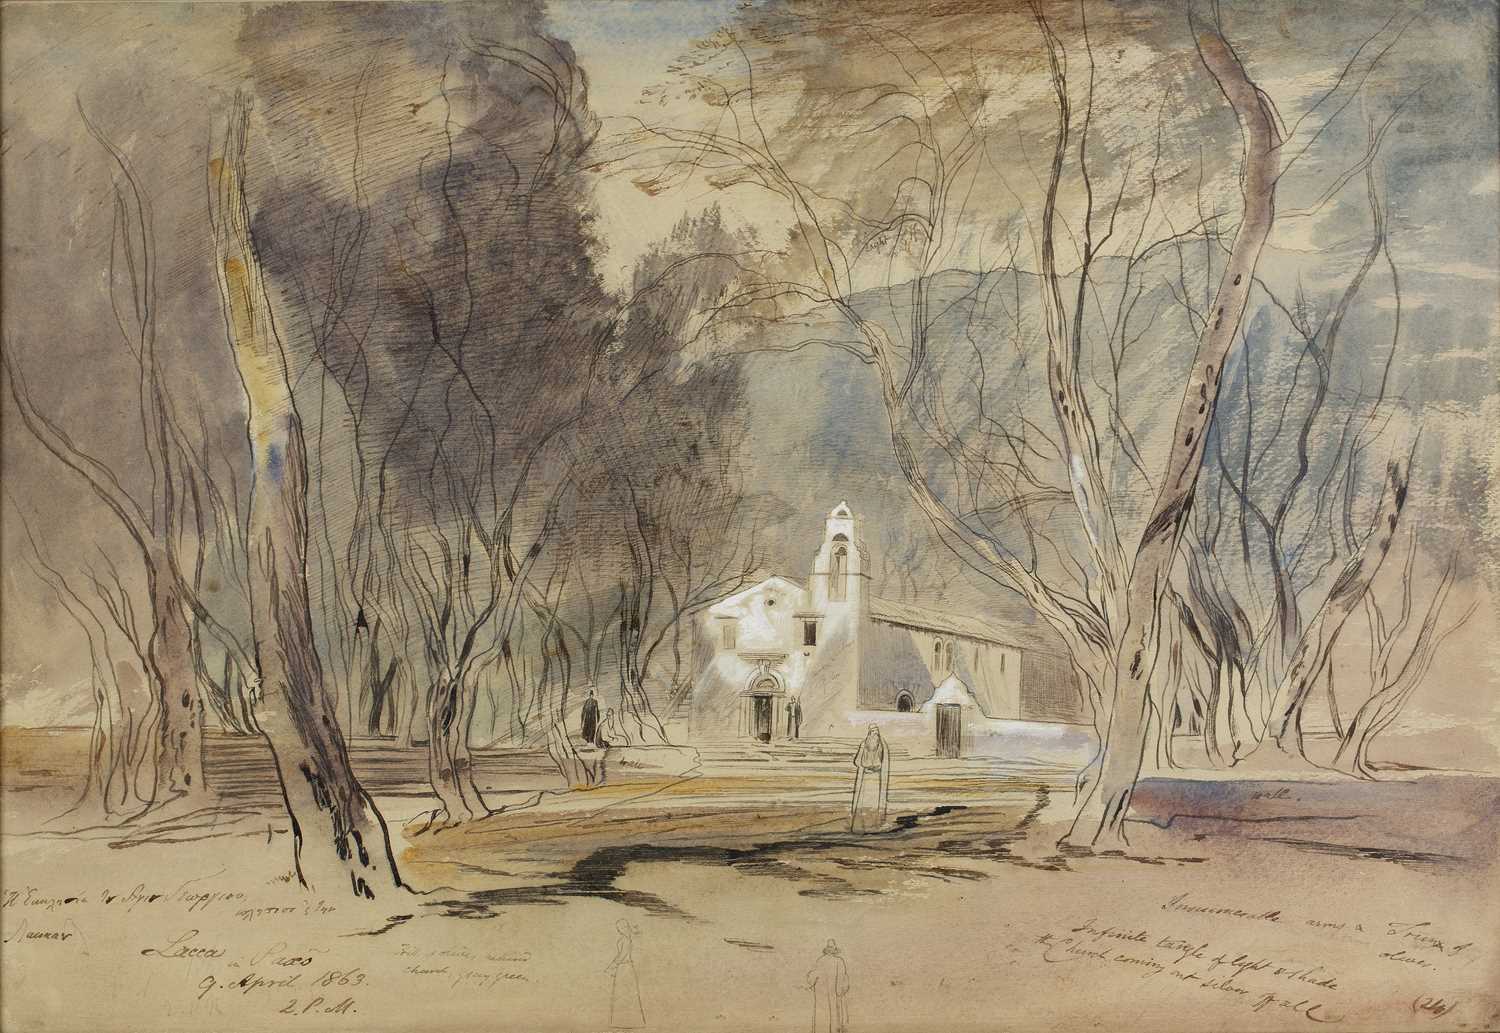 Edward Lear (1812-1888) Lacca in Paxo, inscribed and dated 9 April 1867, pen and sepia ink with